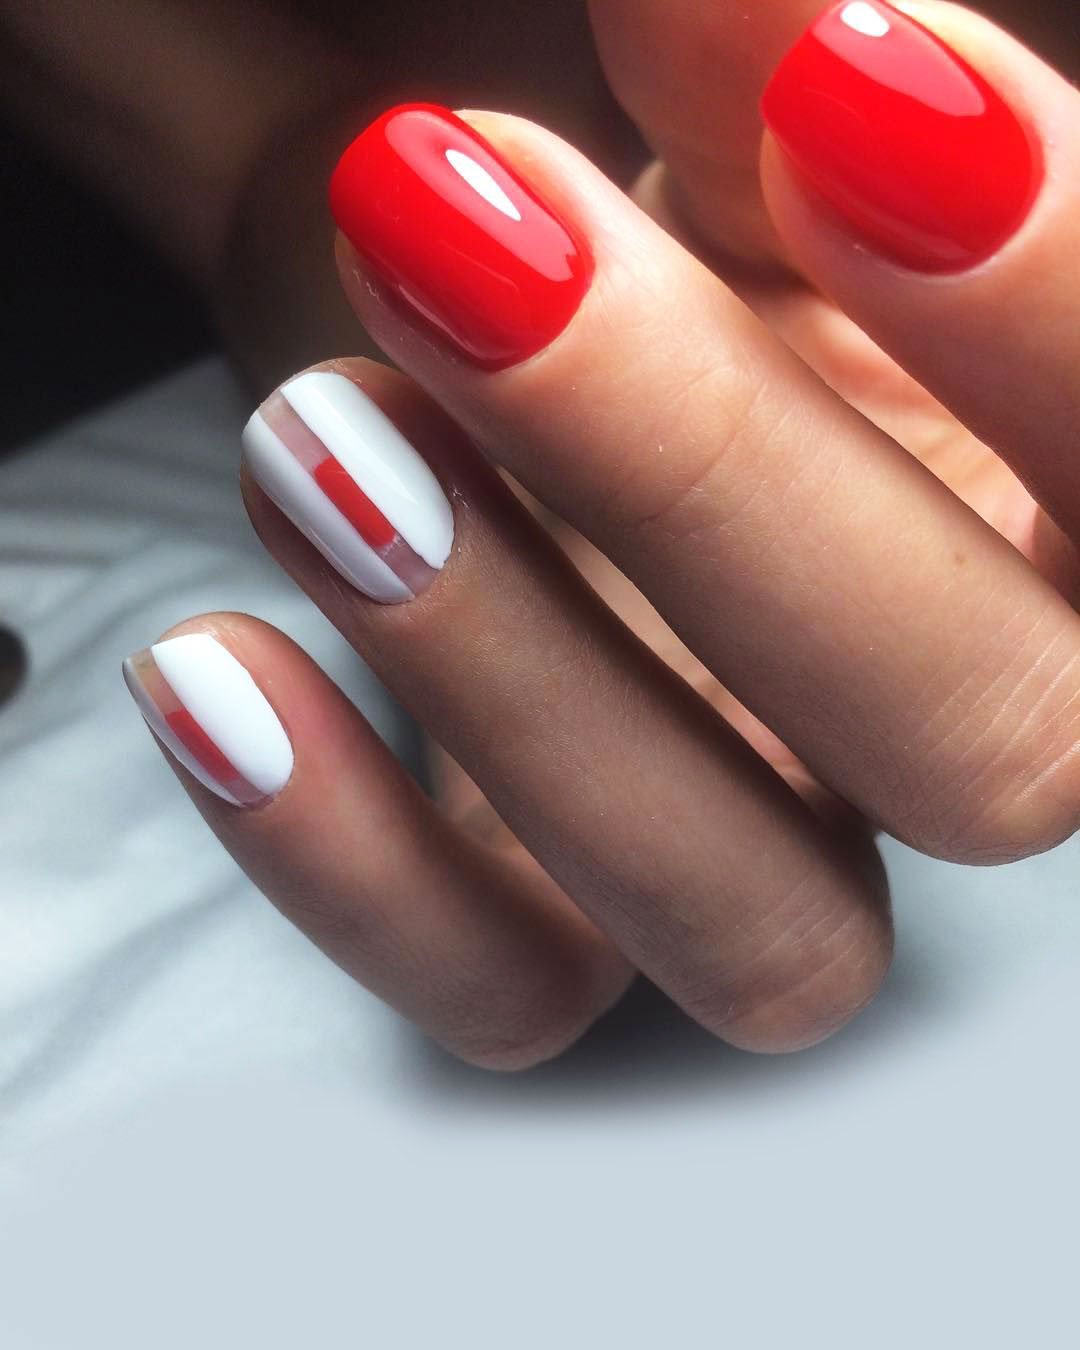 5 Best Summer Acrylic Nail Designs In 2021 - Trendy Nail Designs